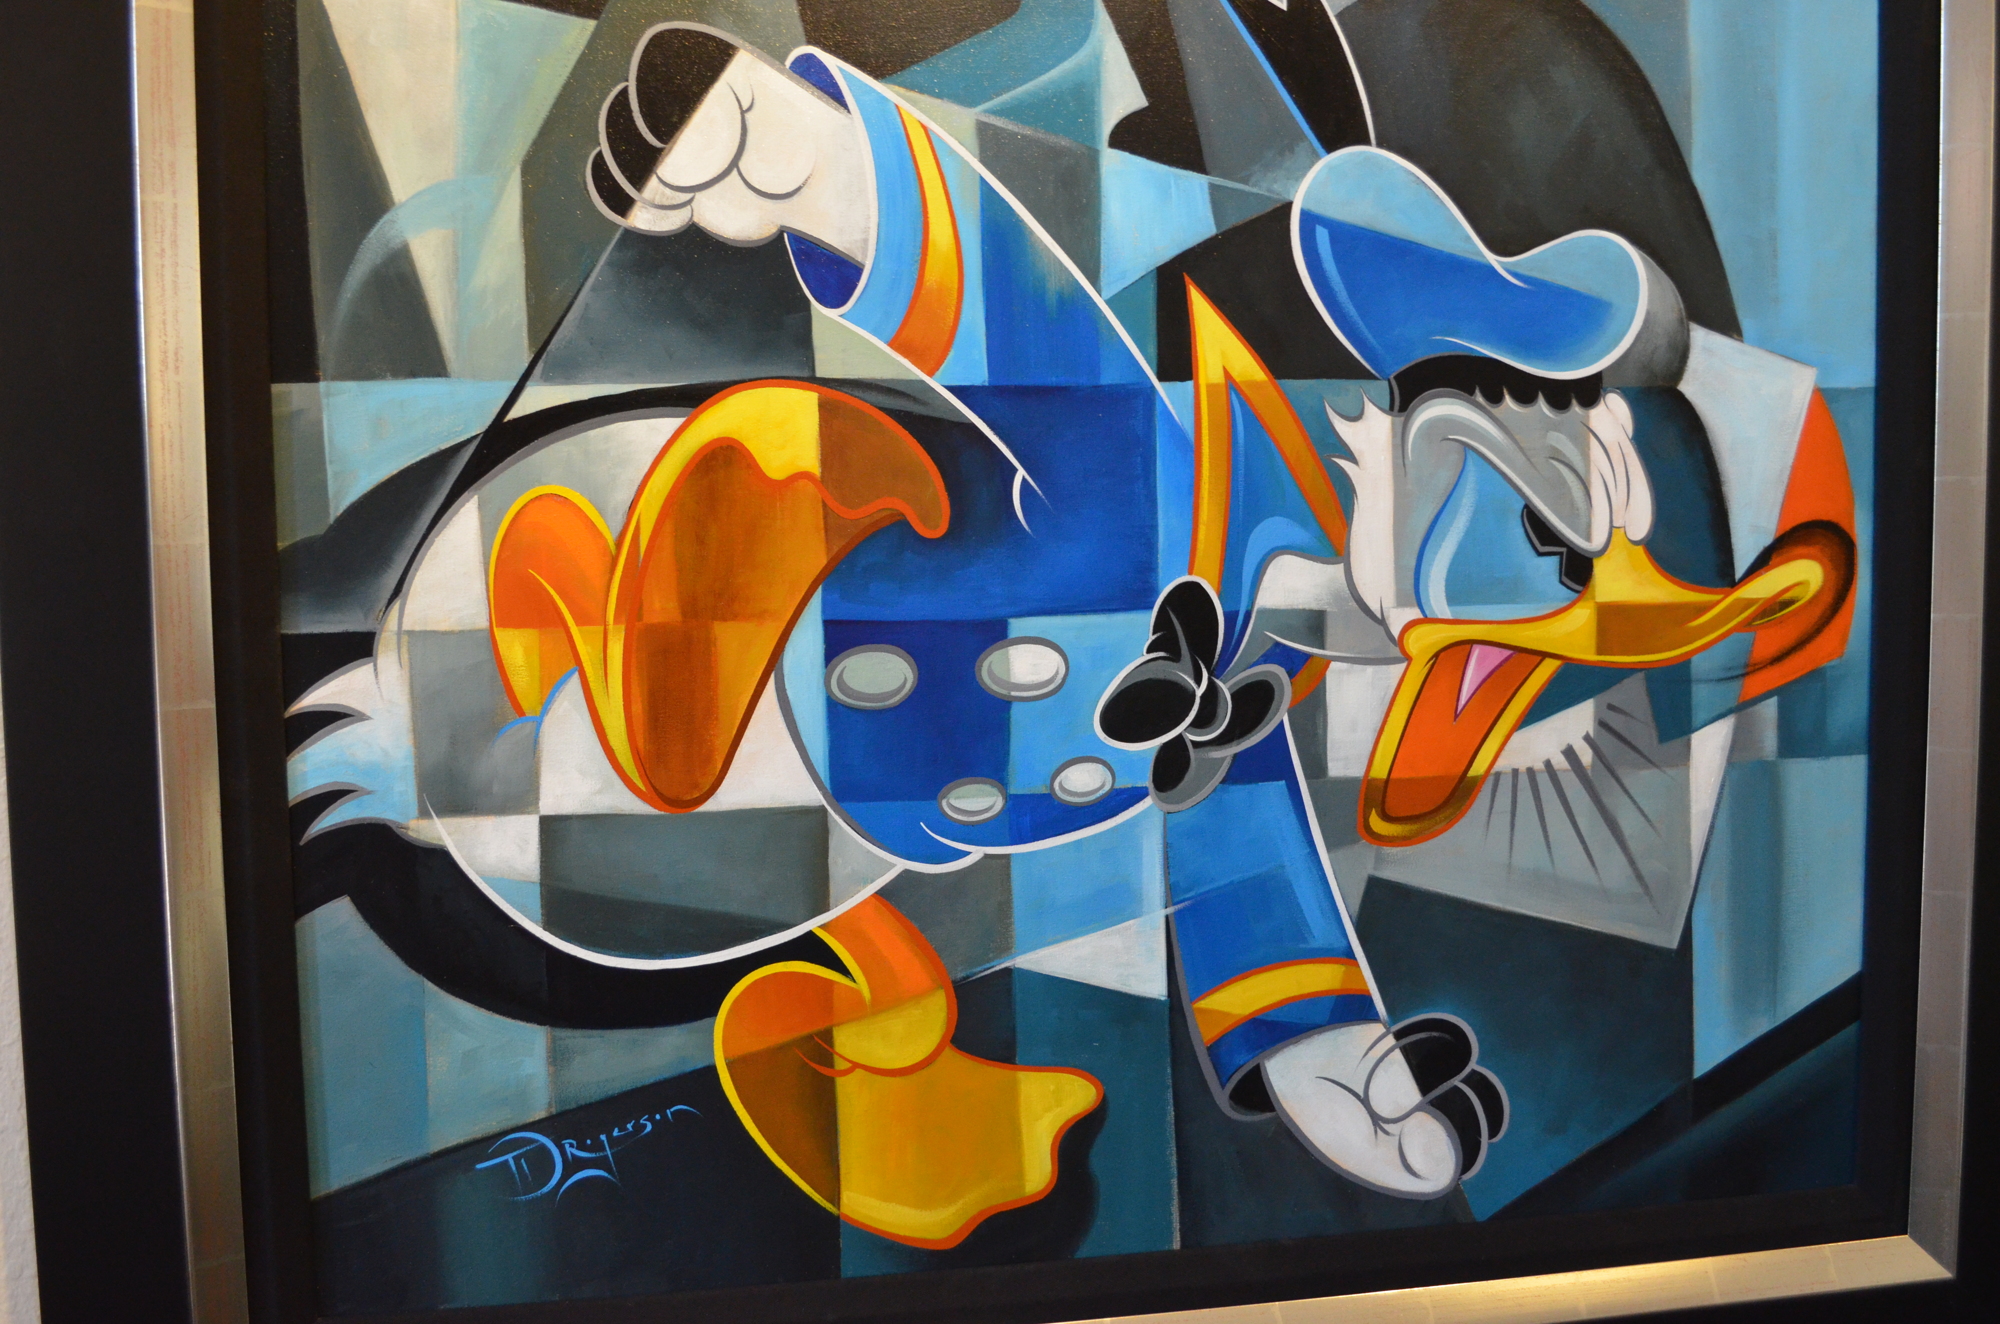 A cubist depiction of Donald Duck by Tim Rogerson